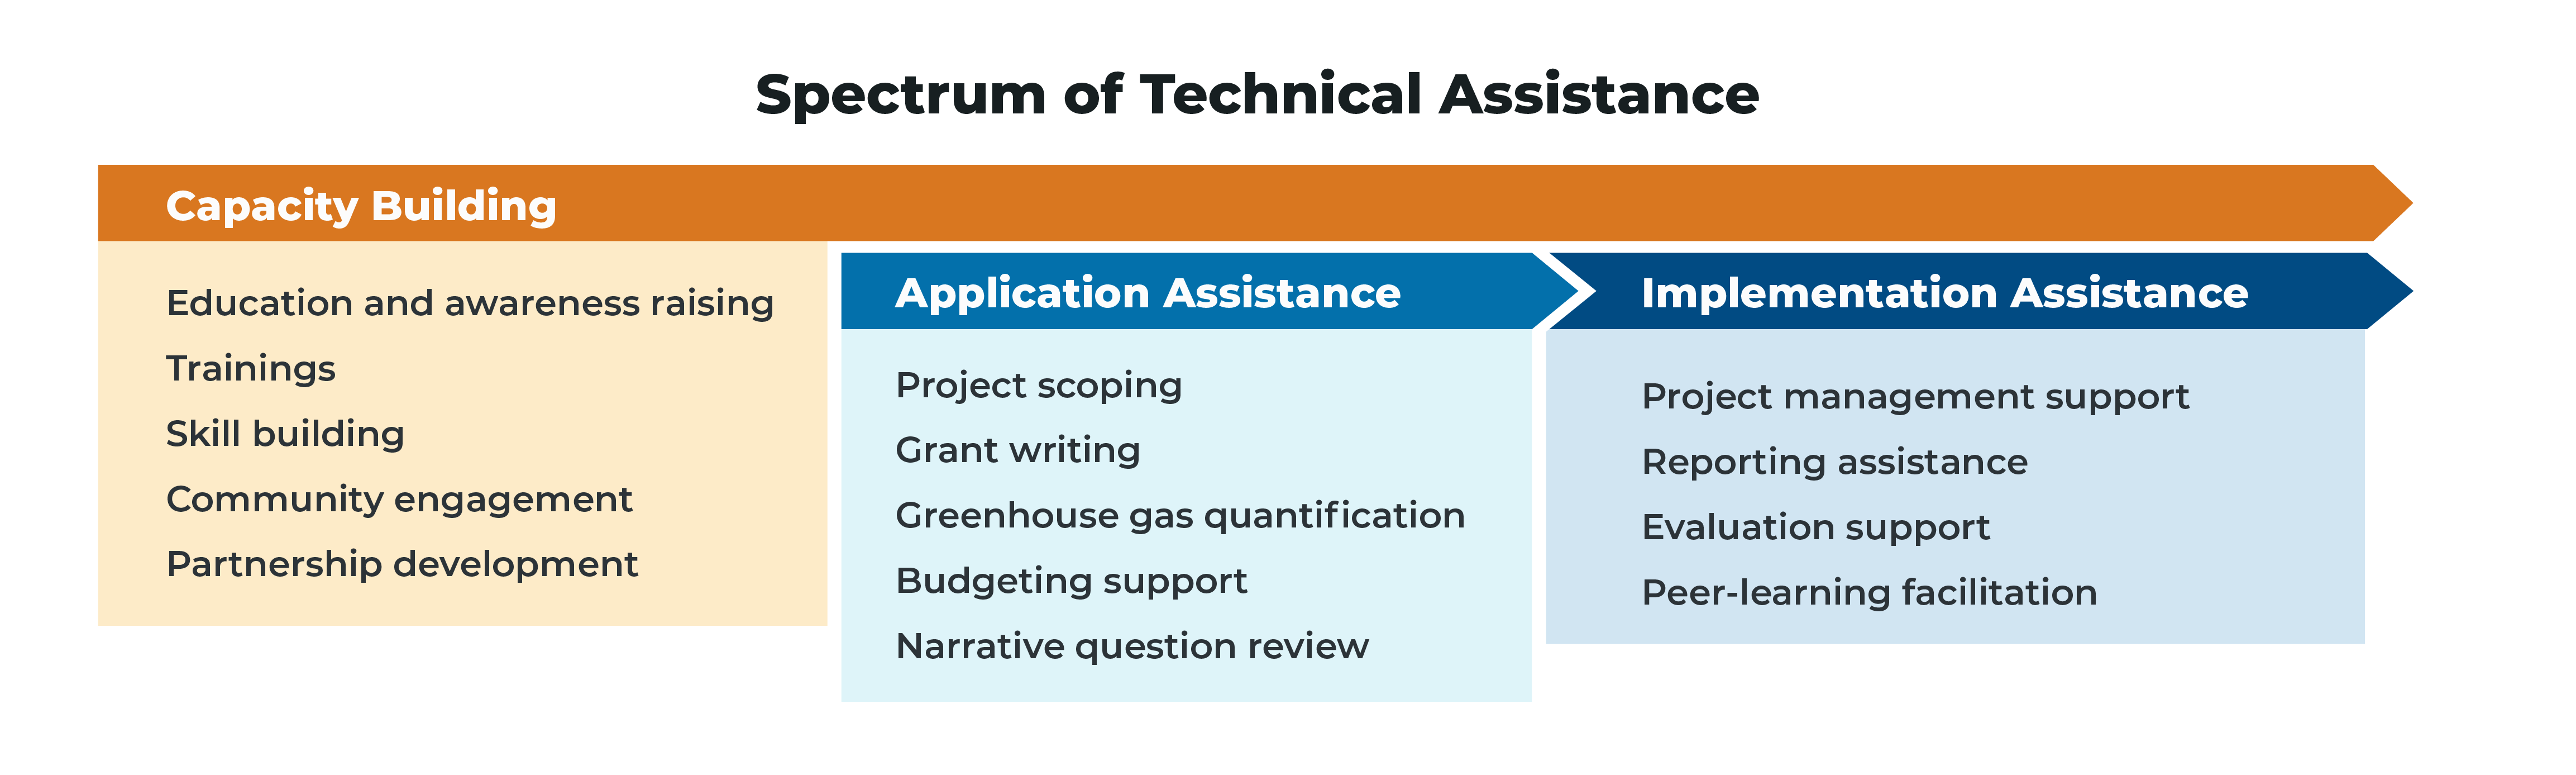 Technical Assistance Spectrum graphic. (Oraange arrow overlaps light blue and dark blue arrow) Capacity Building: Education and awareness raising, trainings, skill building, community engagement, and partnership development. (Light bue arrow points to dark blue arrow) Application Assistance: Project scoping, grant writing, greenhouse gas quanitification, budgeting support, narrative question review. (Dark blue arrow) Implementation Assistance: Project management, reporting assistance, evaluation support, and peer-learning facilitation.